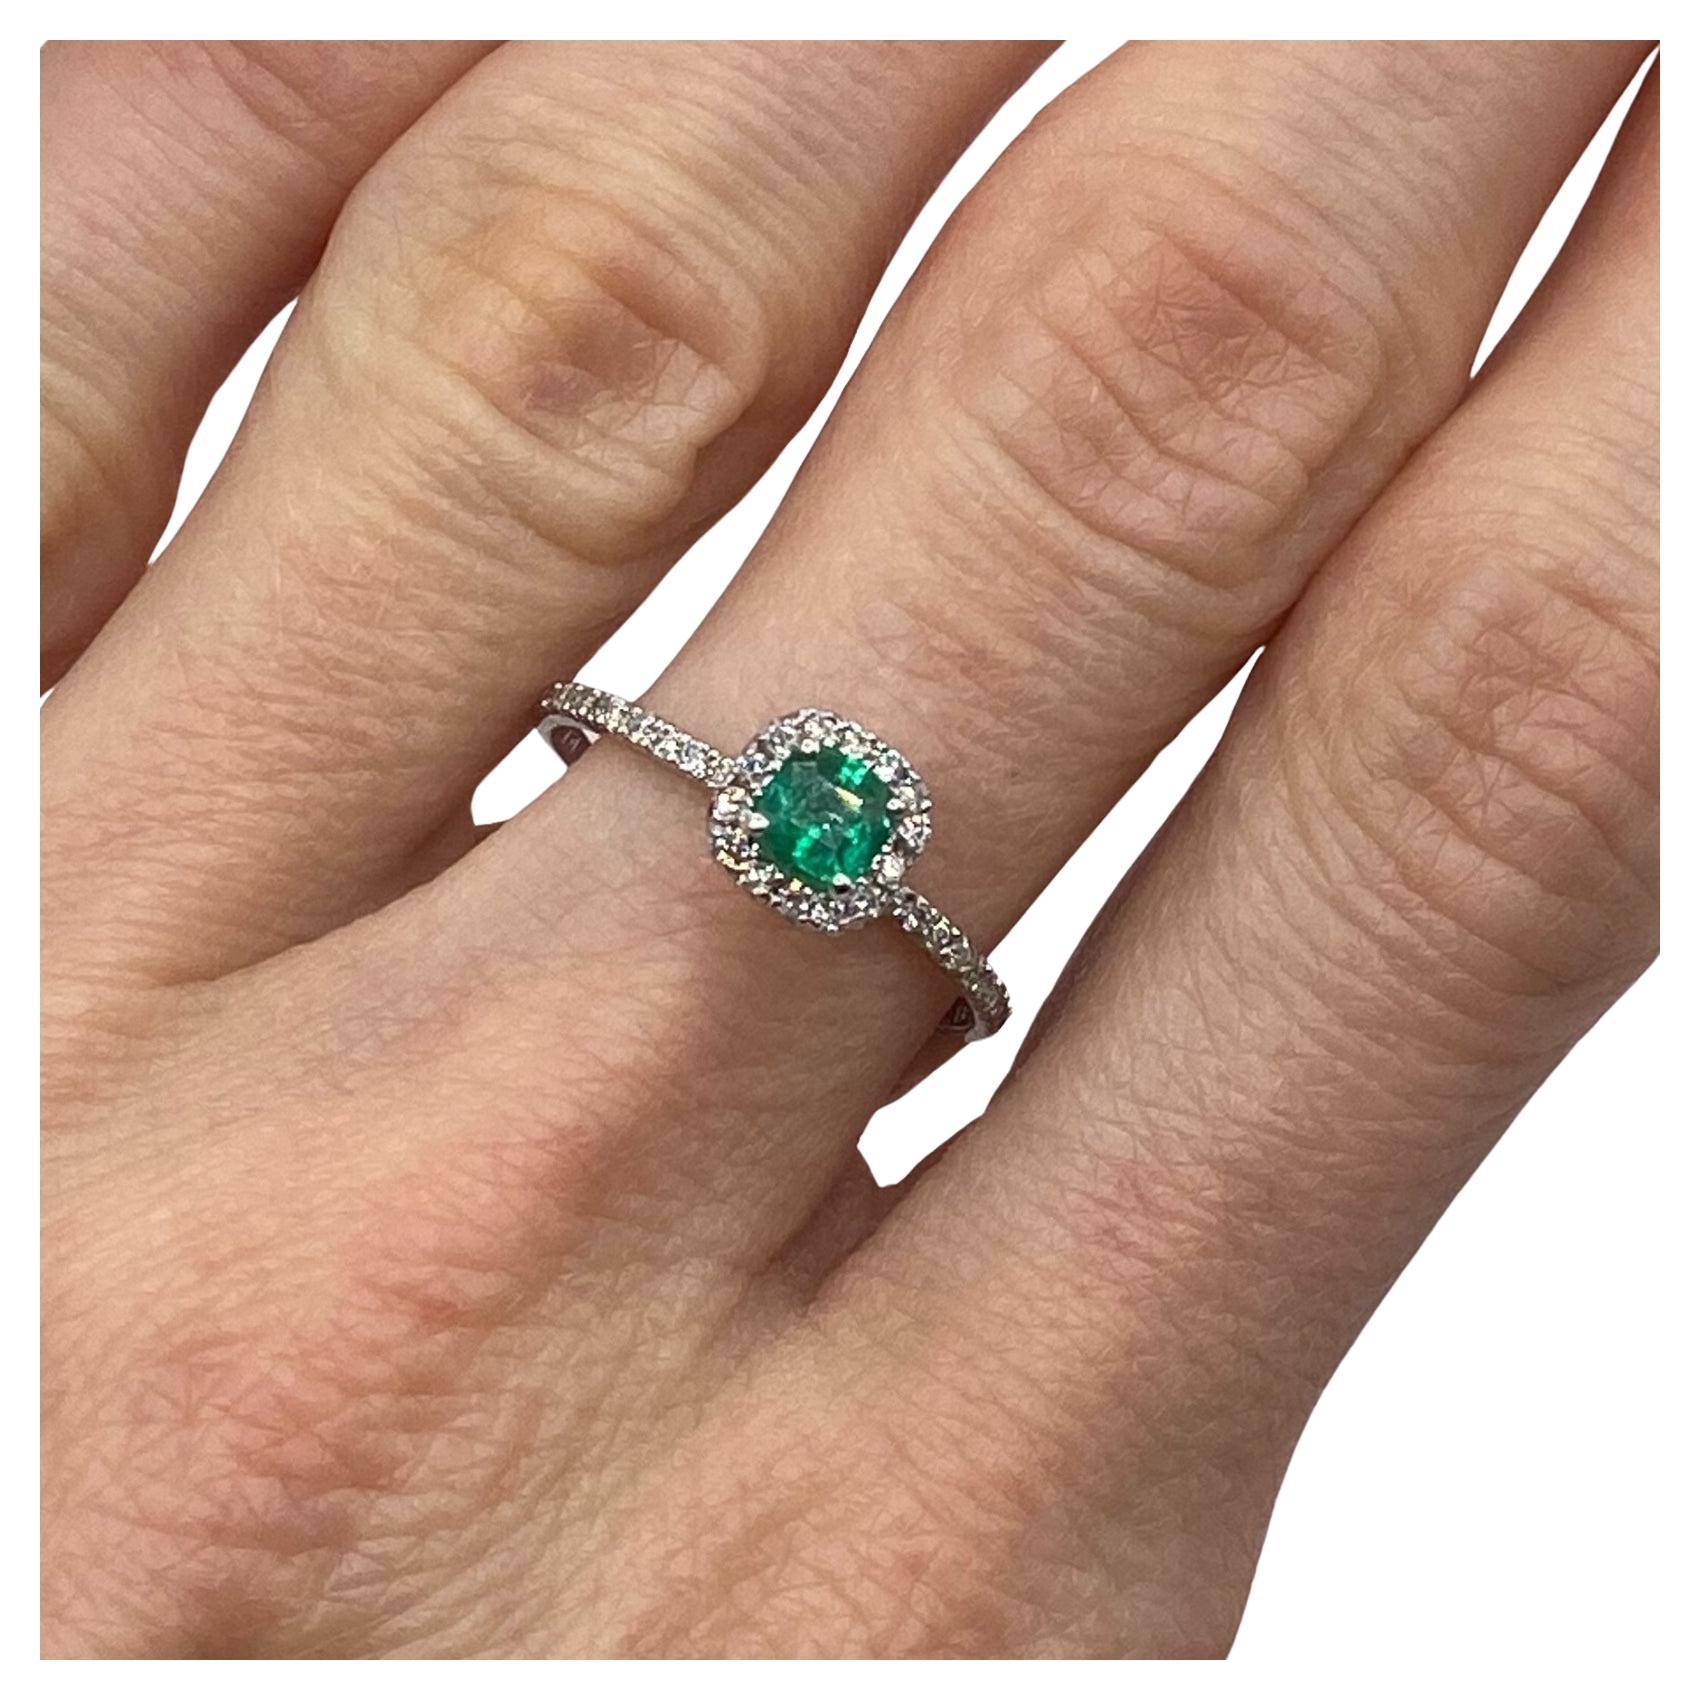 0.59ctw Cushion Cut Emerald & Round Diamond Petite Ring in 14KT White Gold For Sale